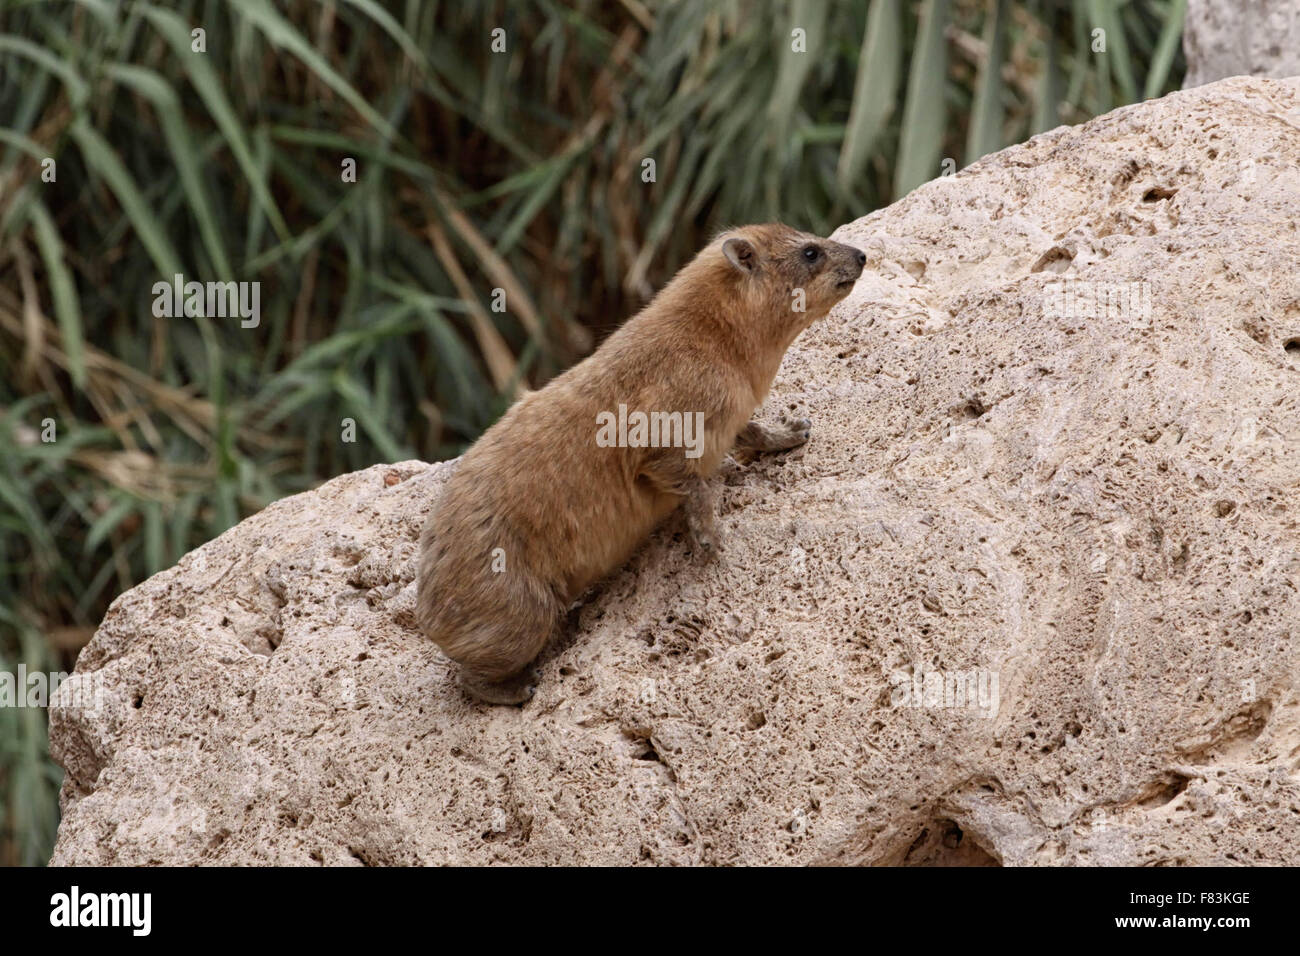 Hyrax This rodent looking animal lives in Ein Gedi in Israel. Stock Photo